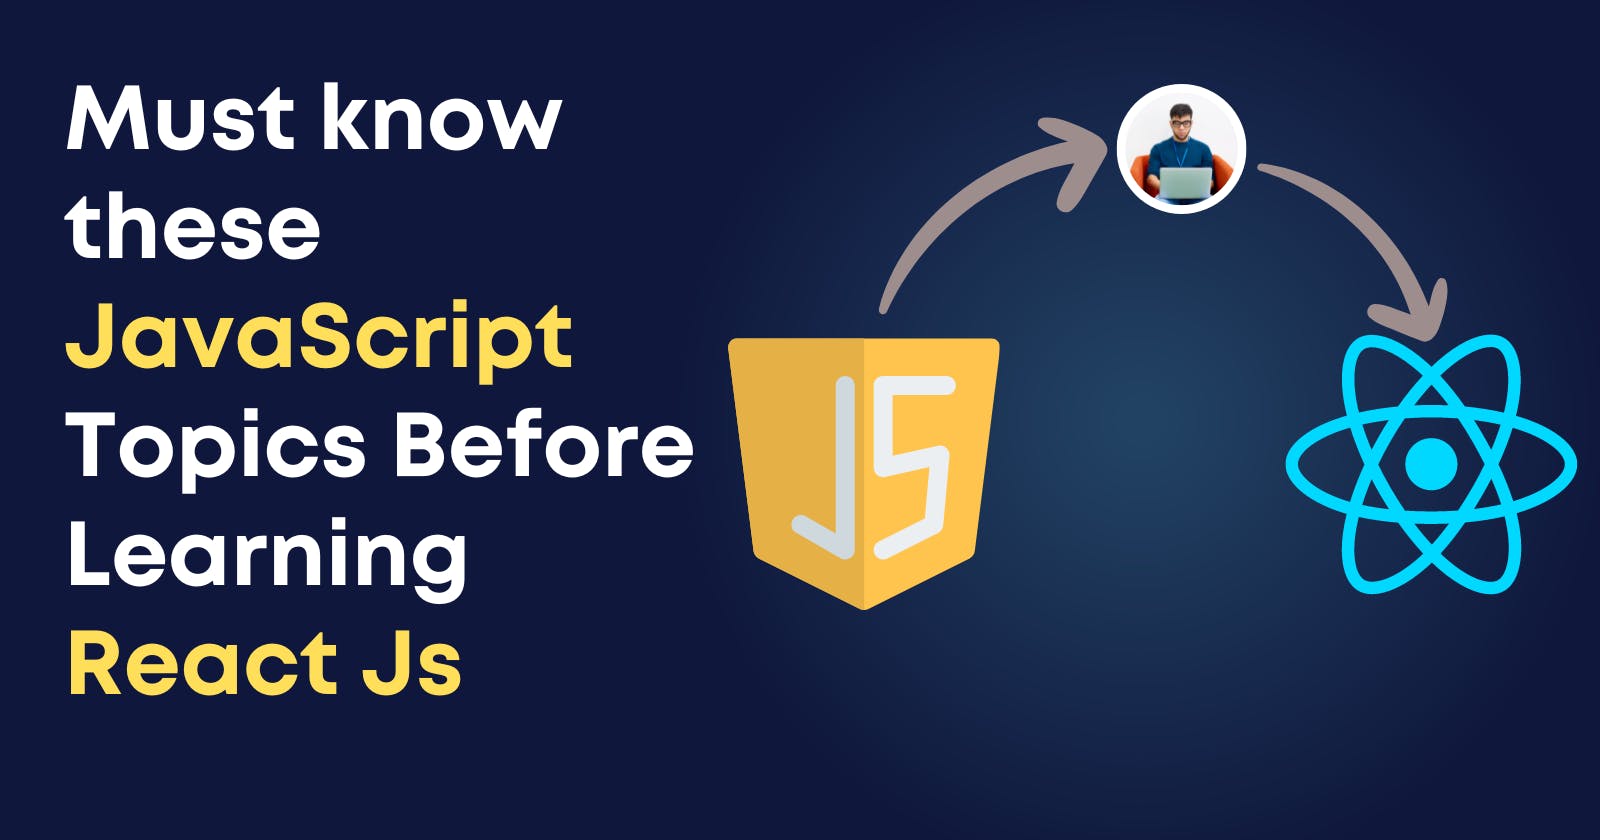 Must know these JavaScript Topics Before Learning React Js